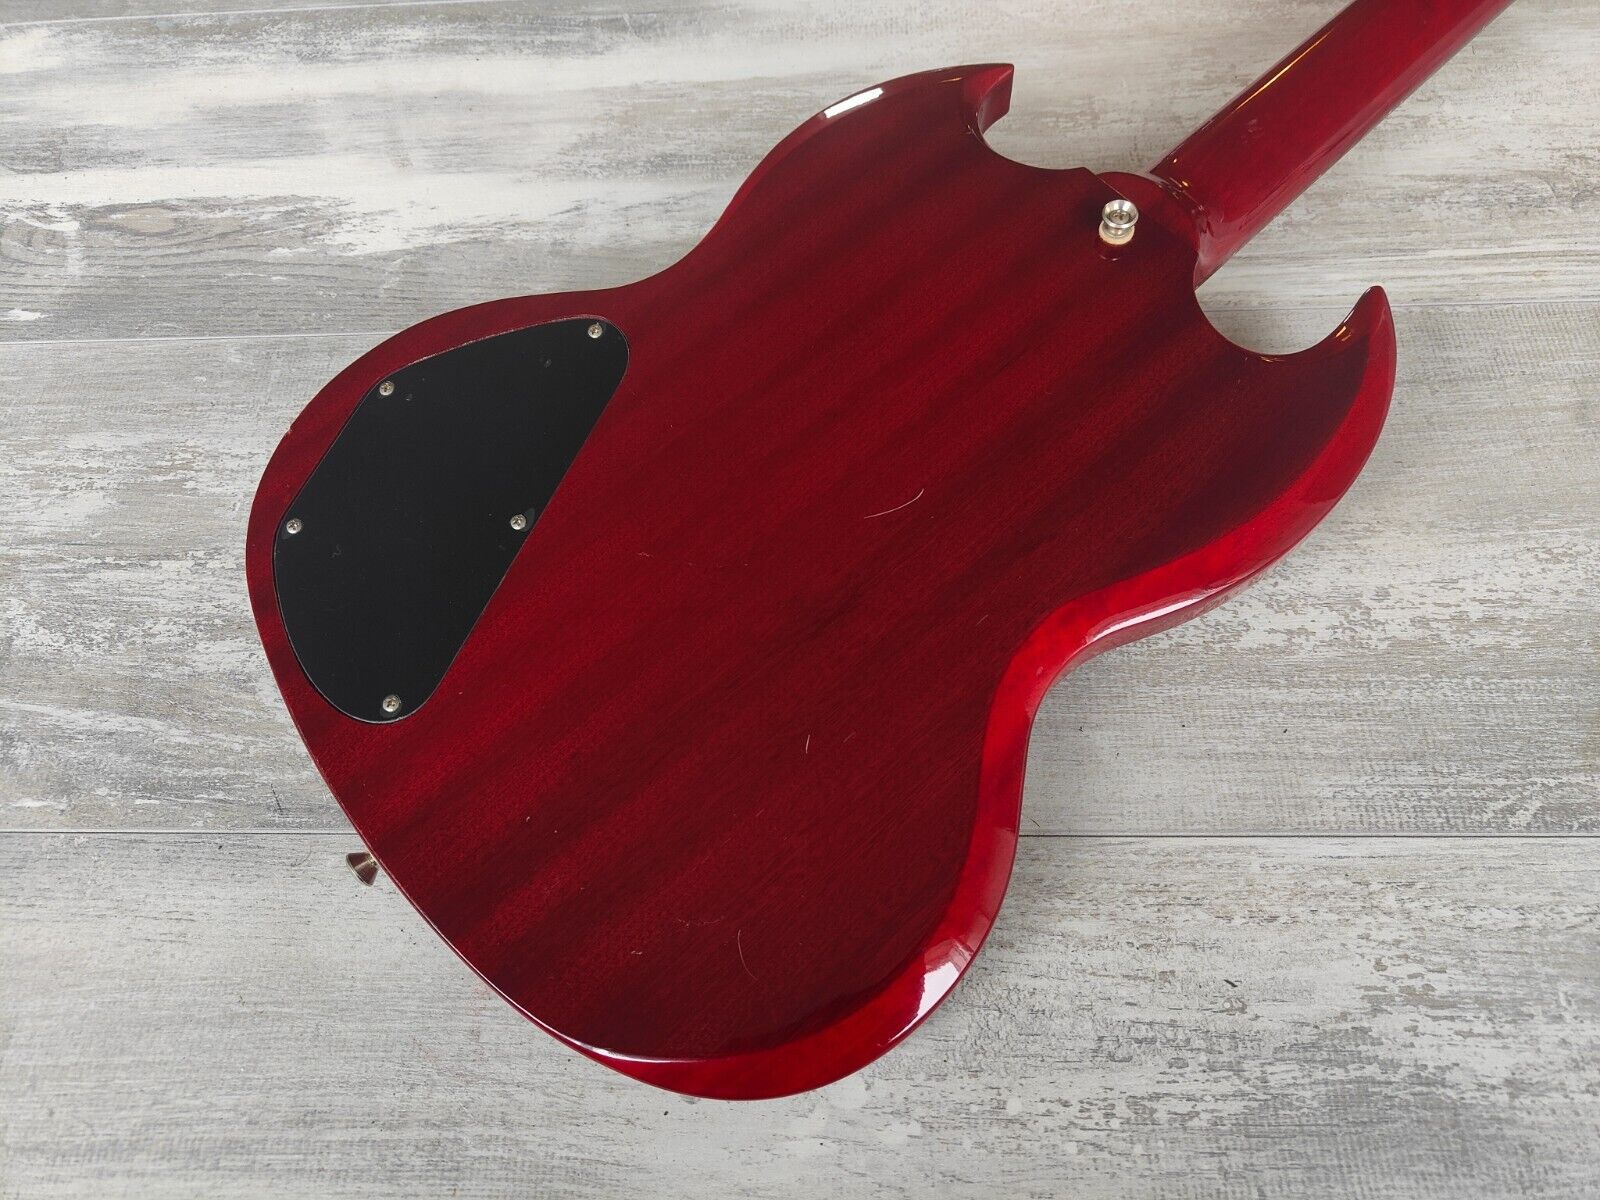 2008 Epiphone G-400 SG Standard (Red)